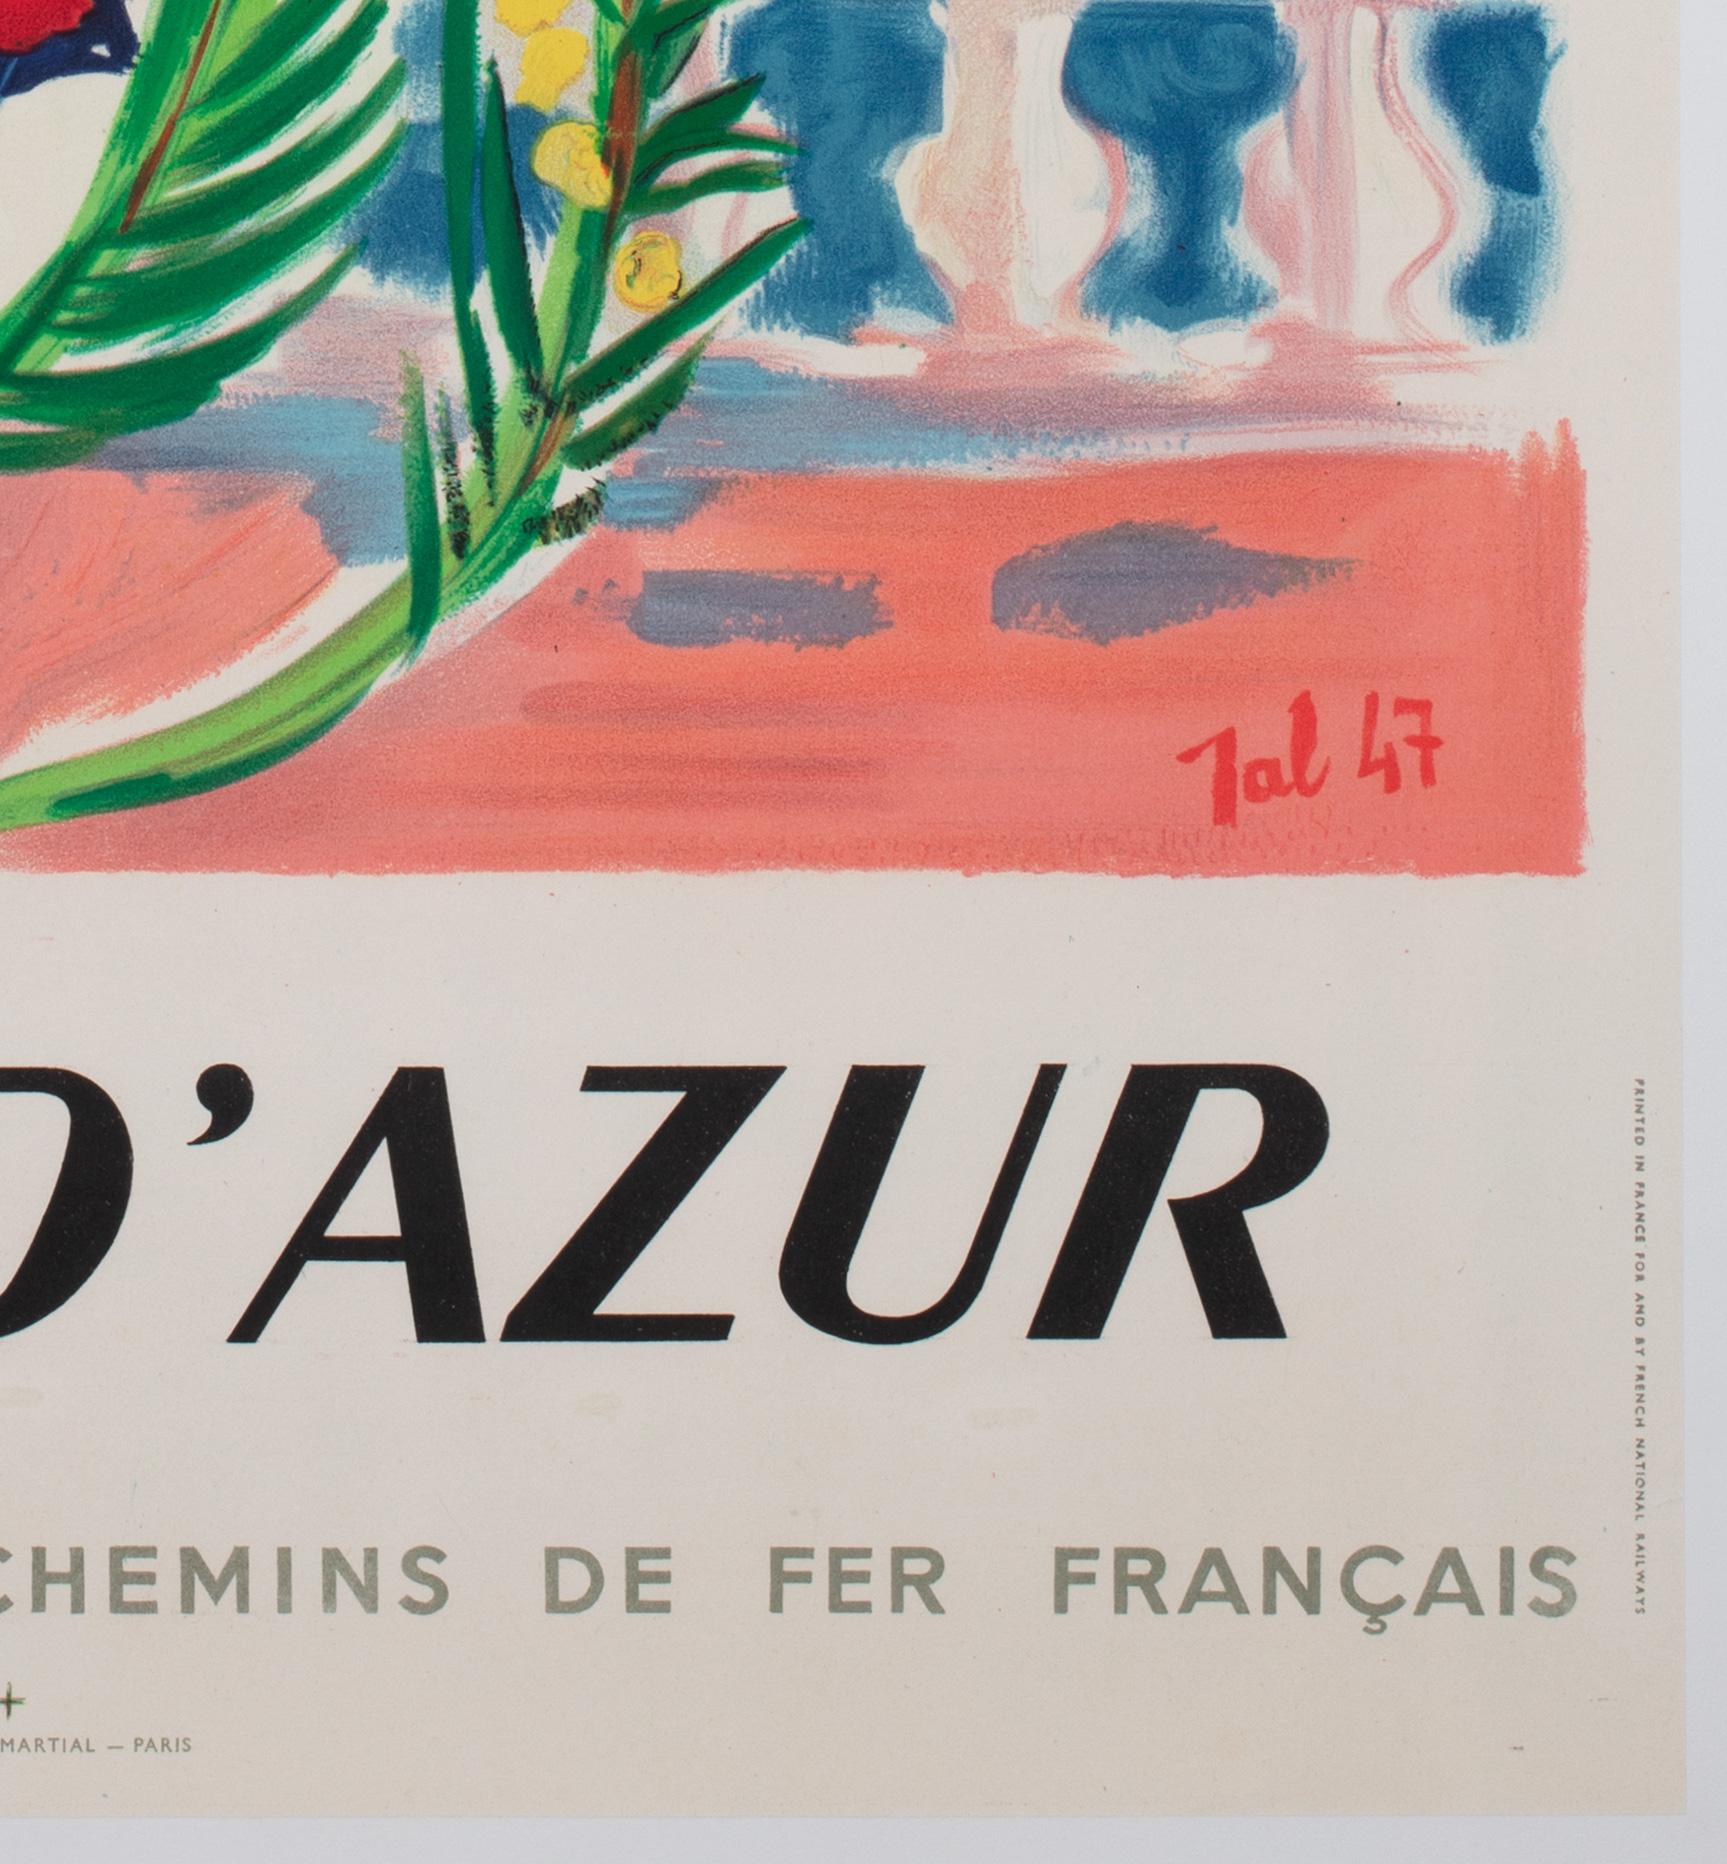 Cote d'Azur 1947 SNCF French Railway Travel Advertising Poster, Jal 3